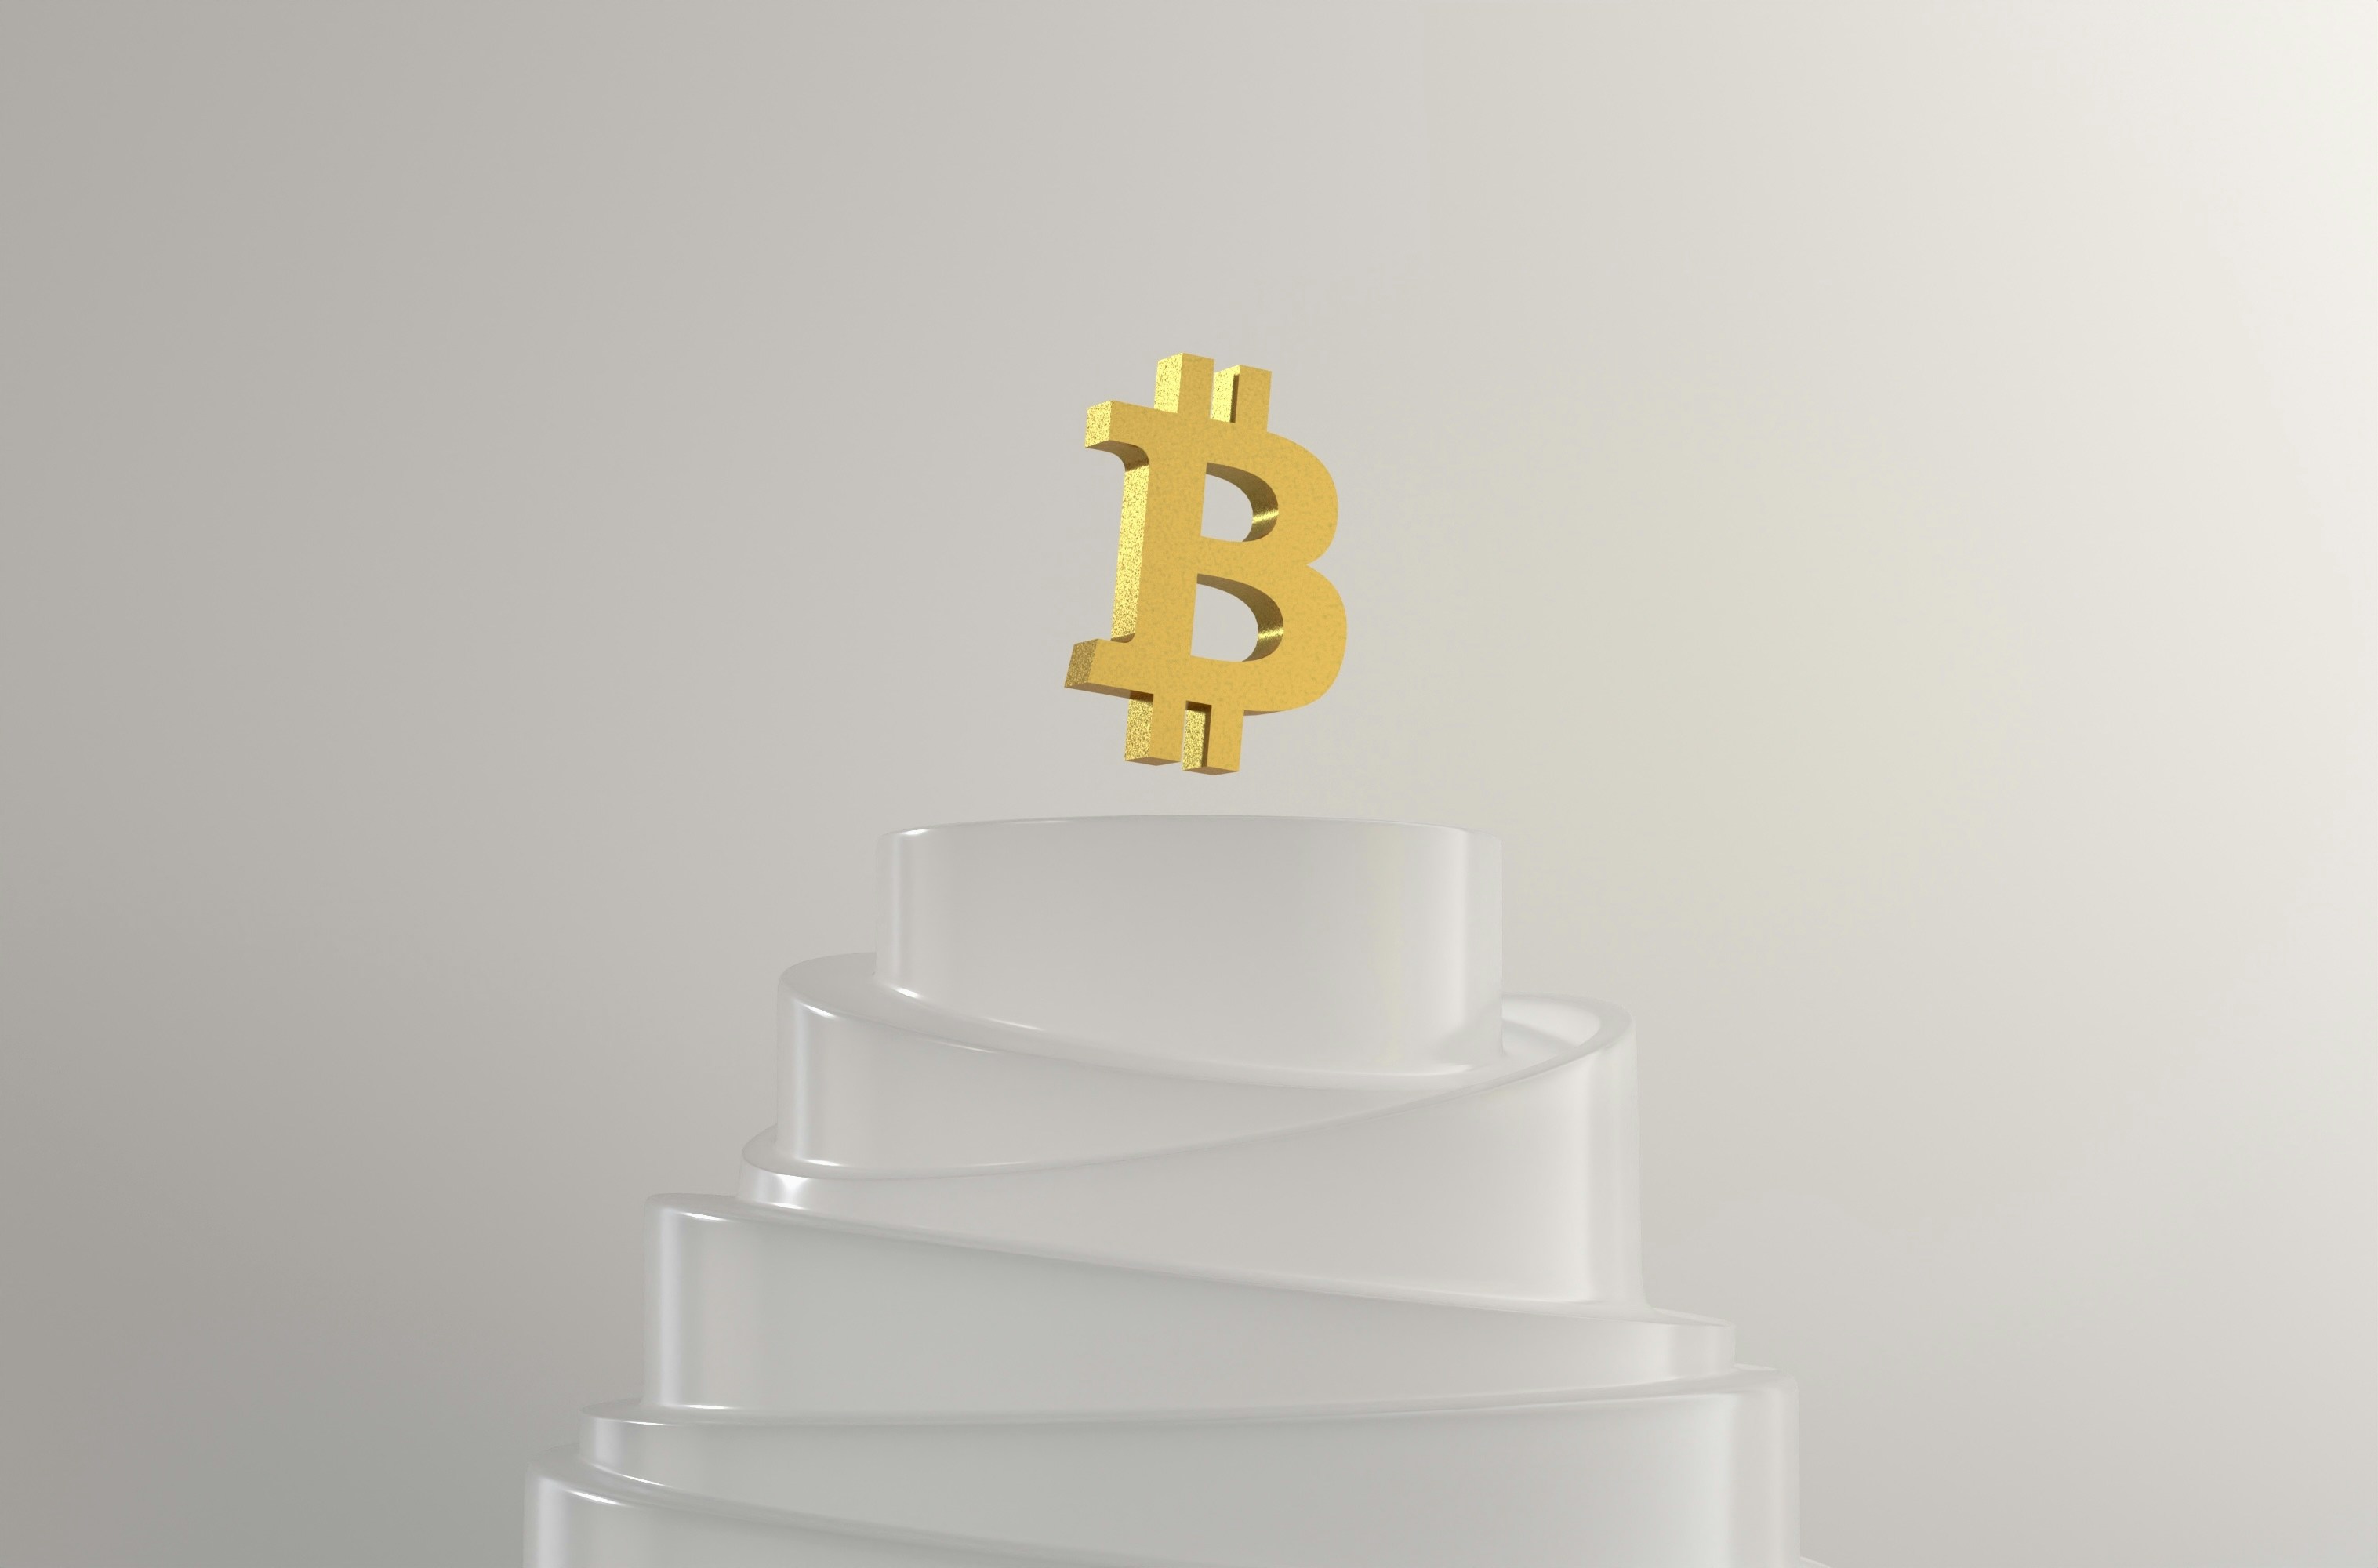 Bitcoin 3D icon illustration. Download this premium image of BTC, the most popular cryptocurrency in the world🔝 📩 Feel free to contact me by email: mariia.shalabaieva@gmail.com